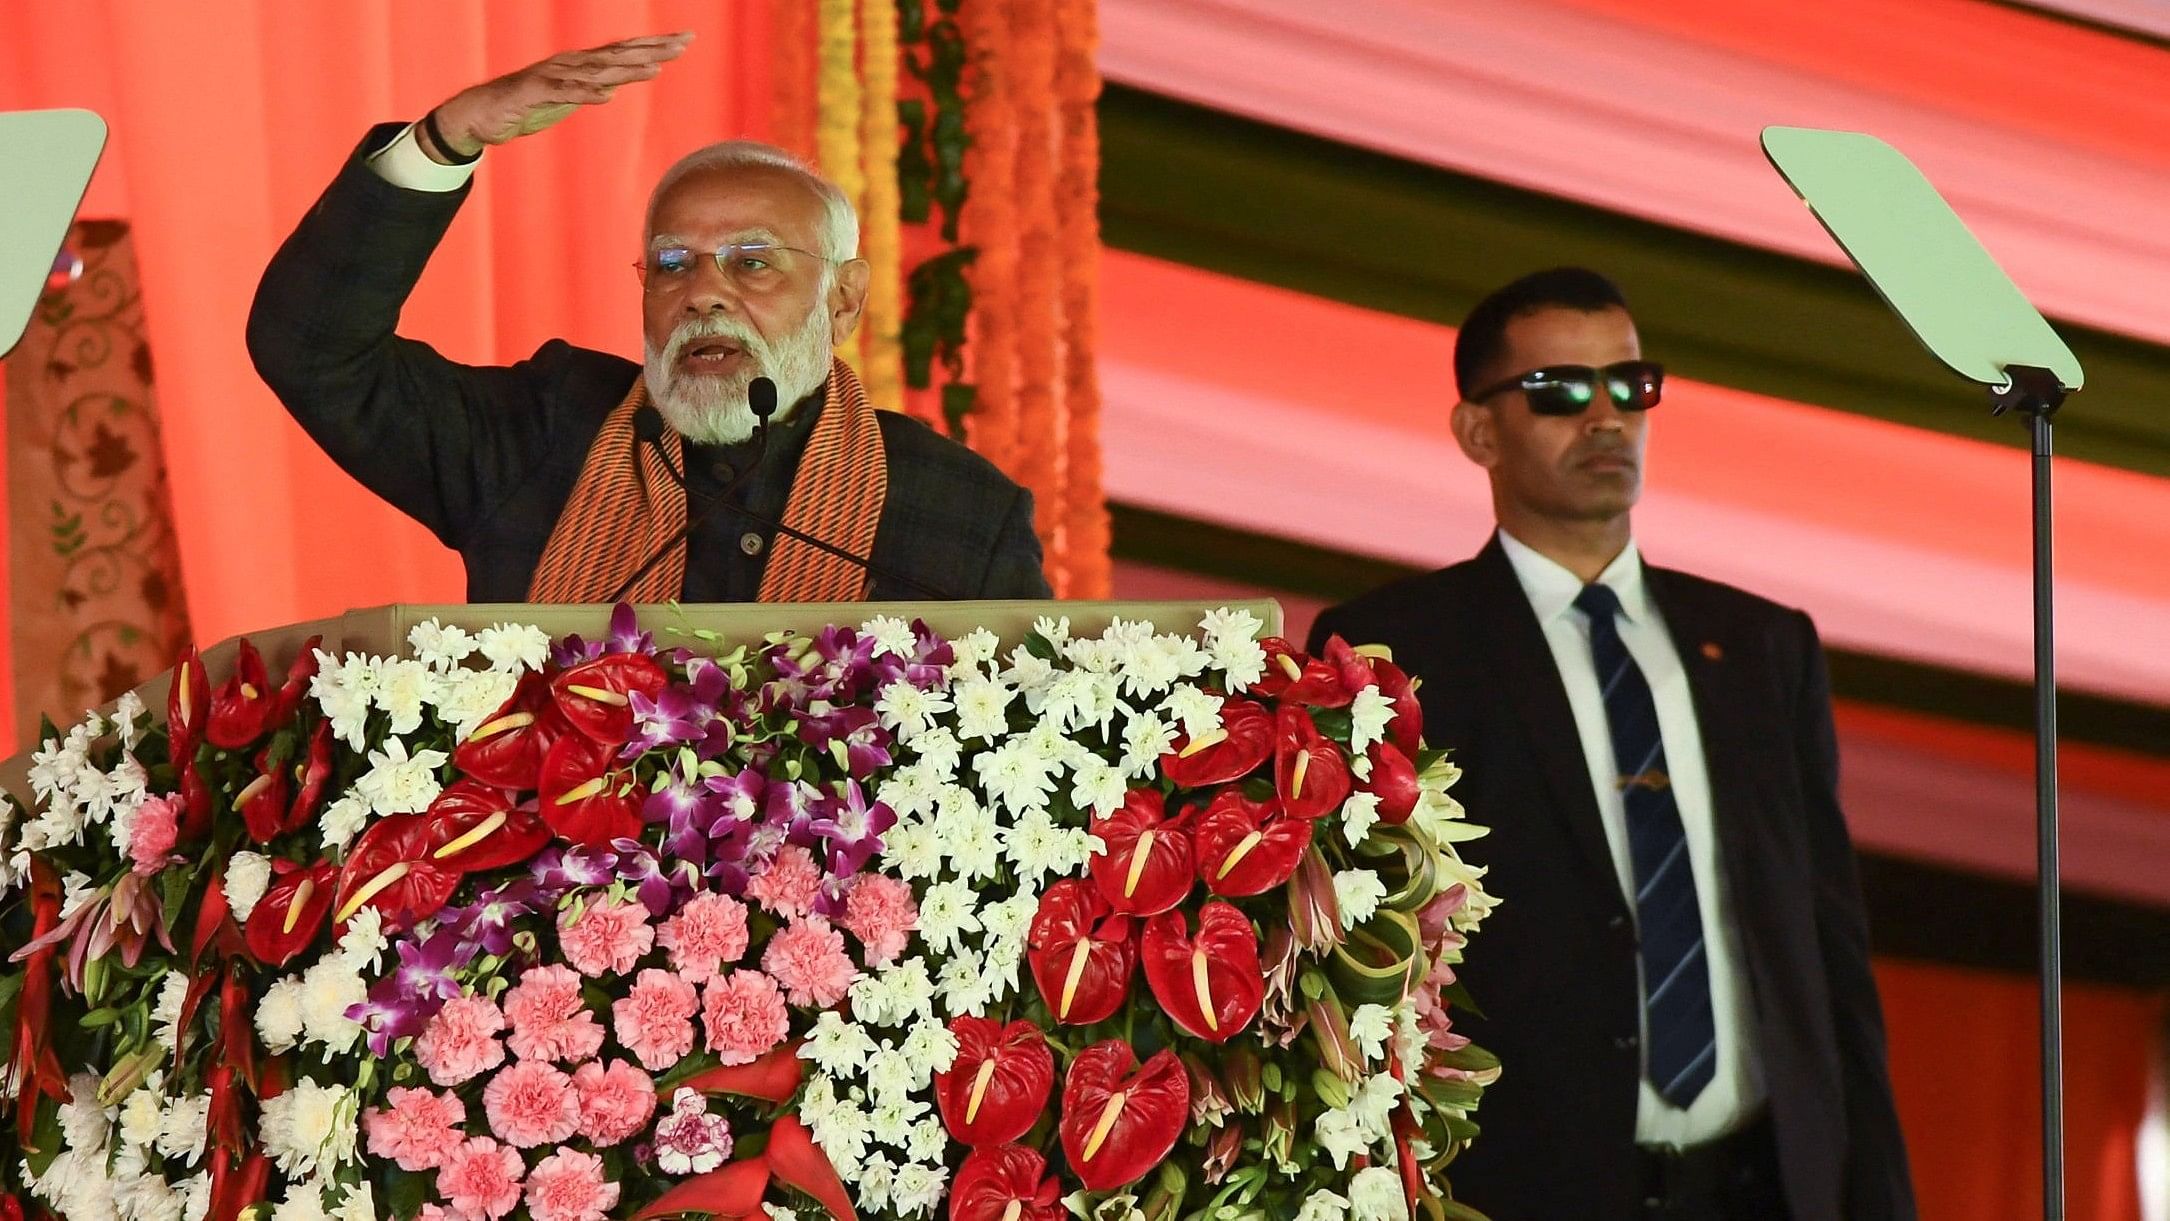 <div class="paragraphs"><p>A photo of Prime Minister Narendra Modi speaking during a rally, as his bodyguard looks on.</p></div>